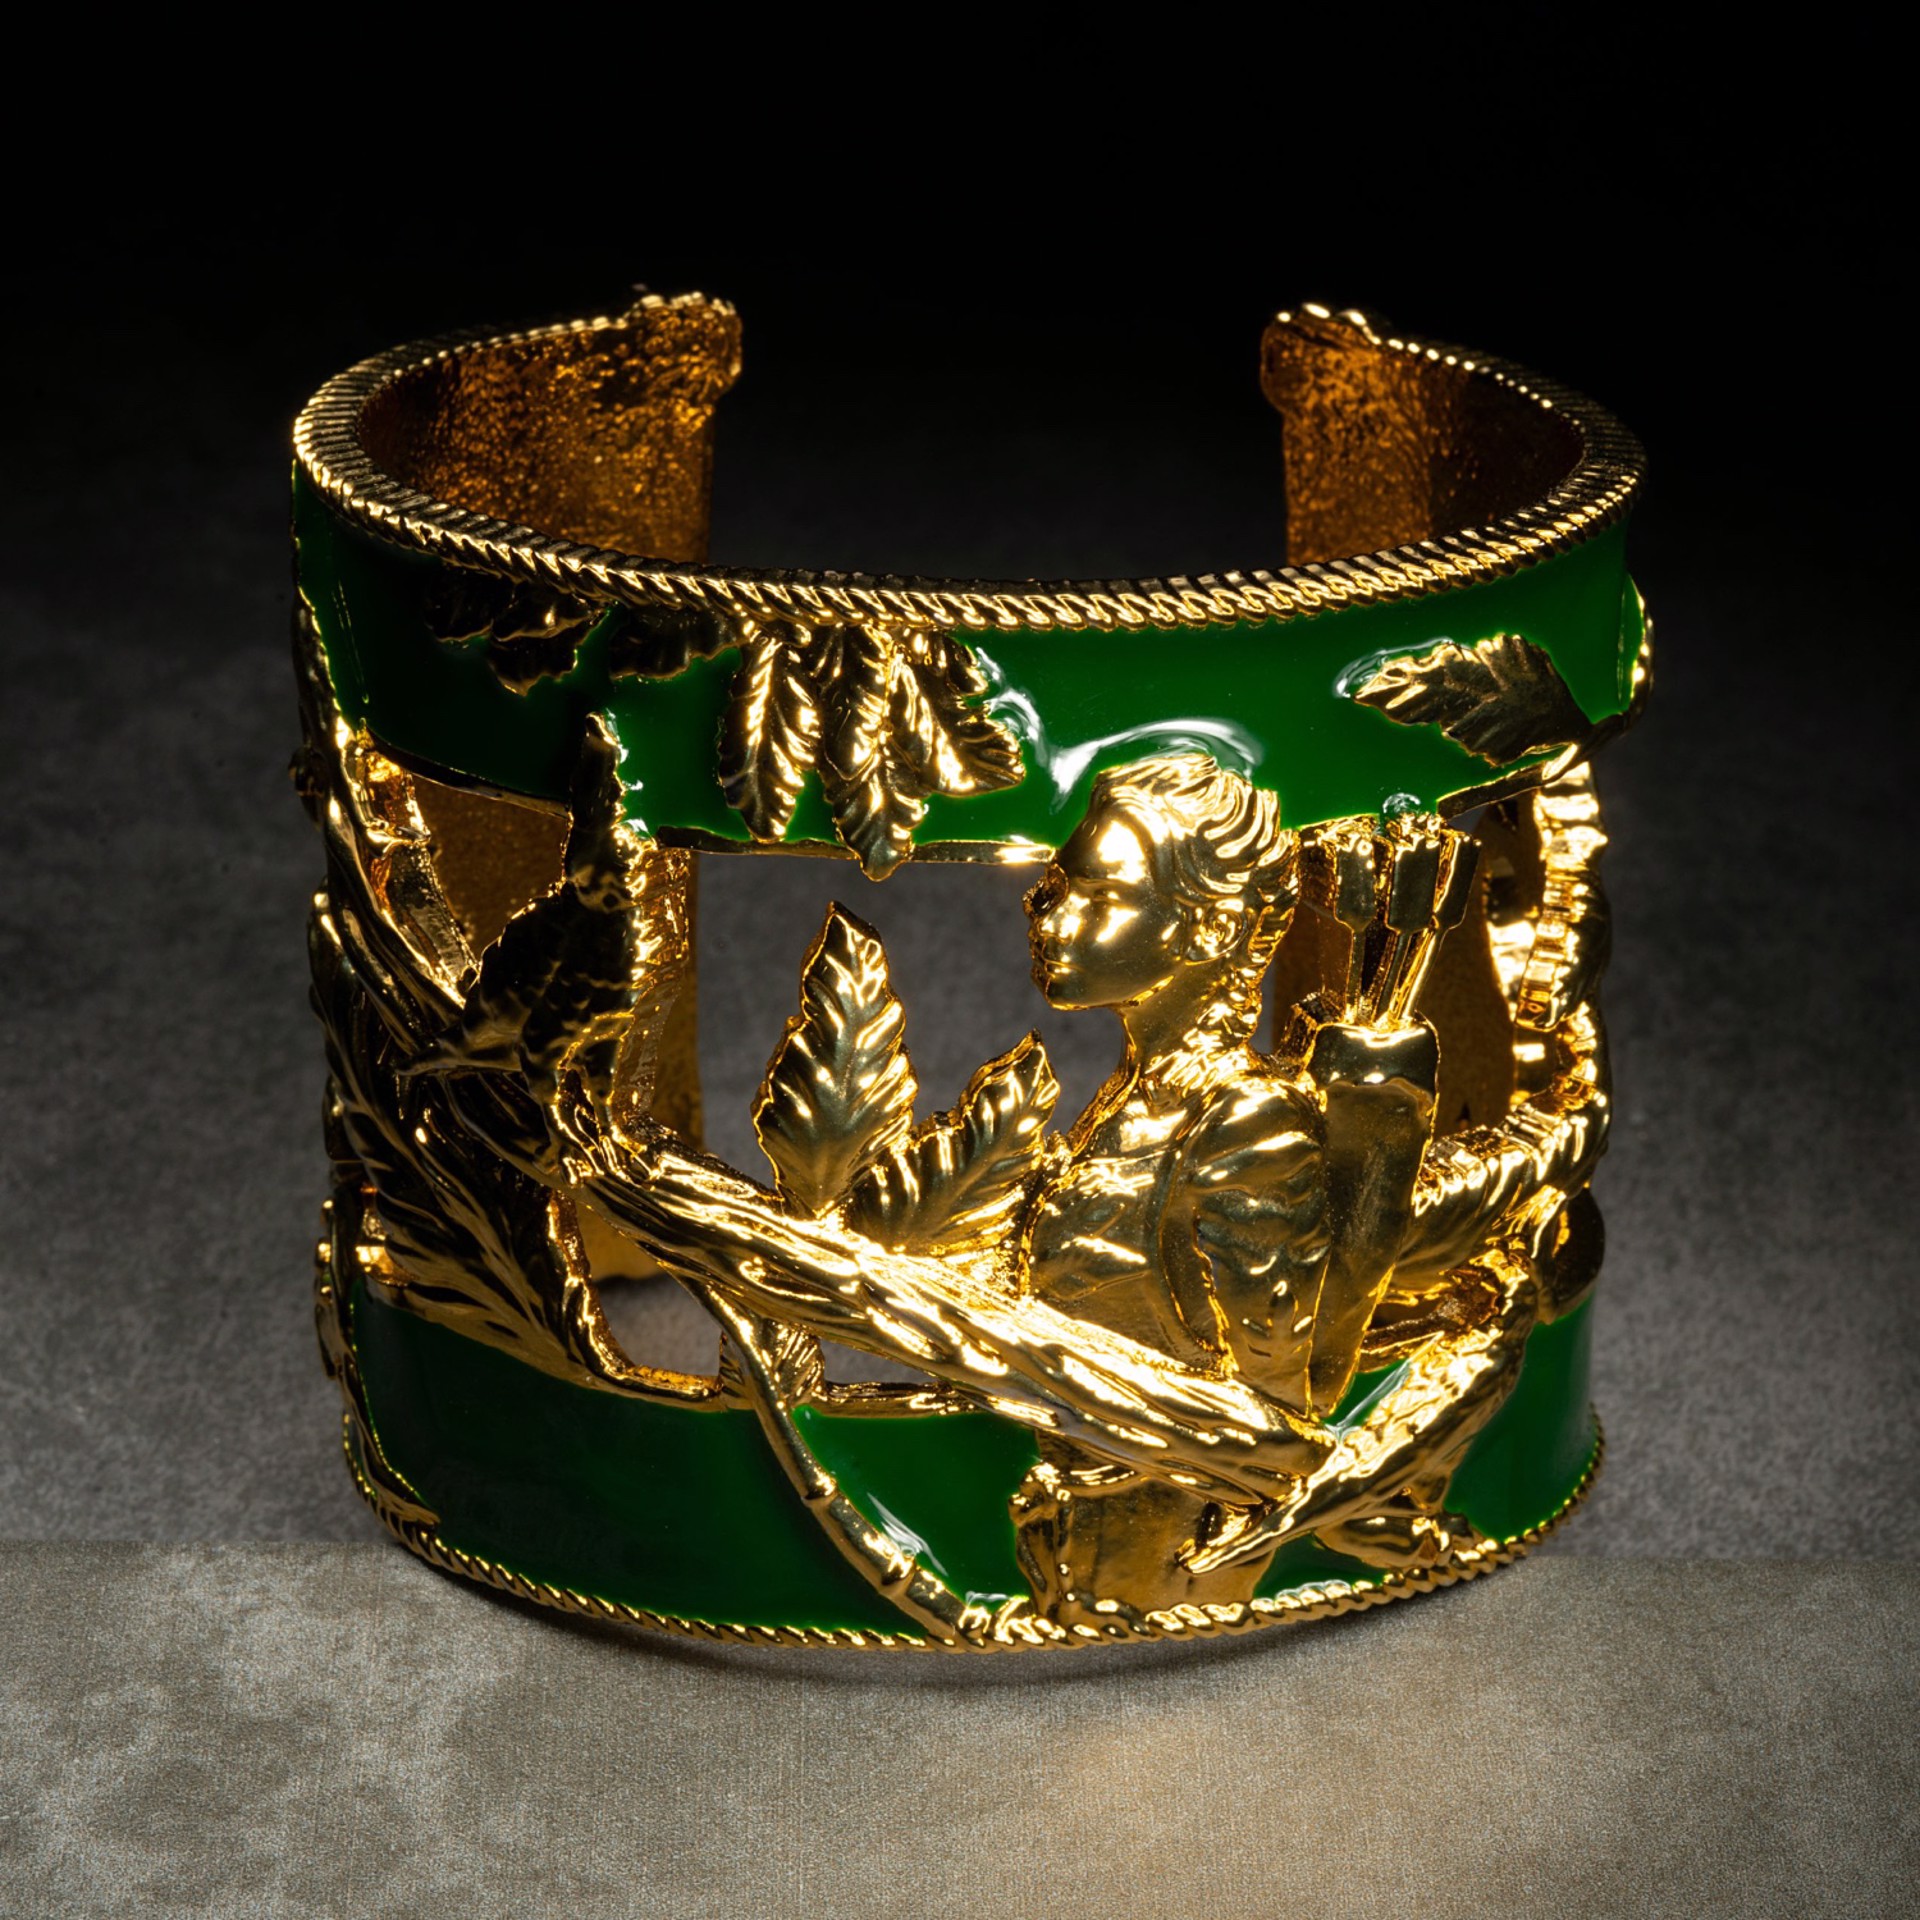 Vigor Cuff - Gold and Green  Xsm/ Small by Angela Mia